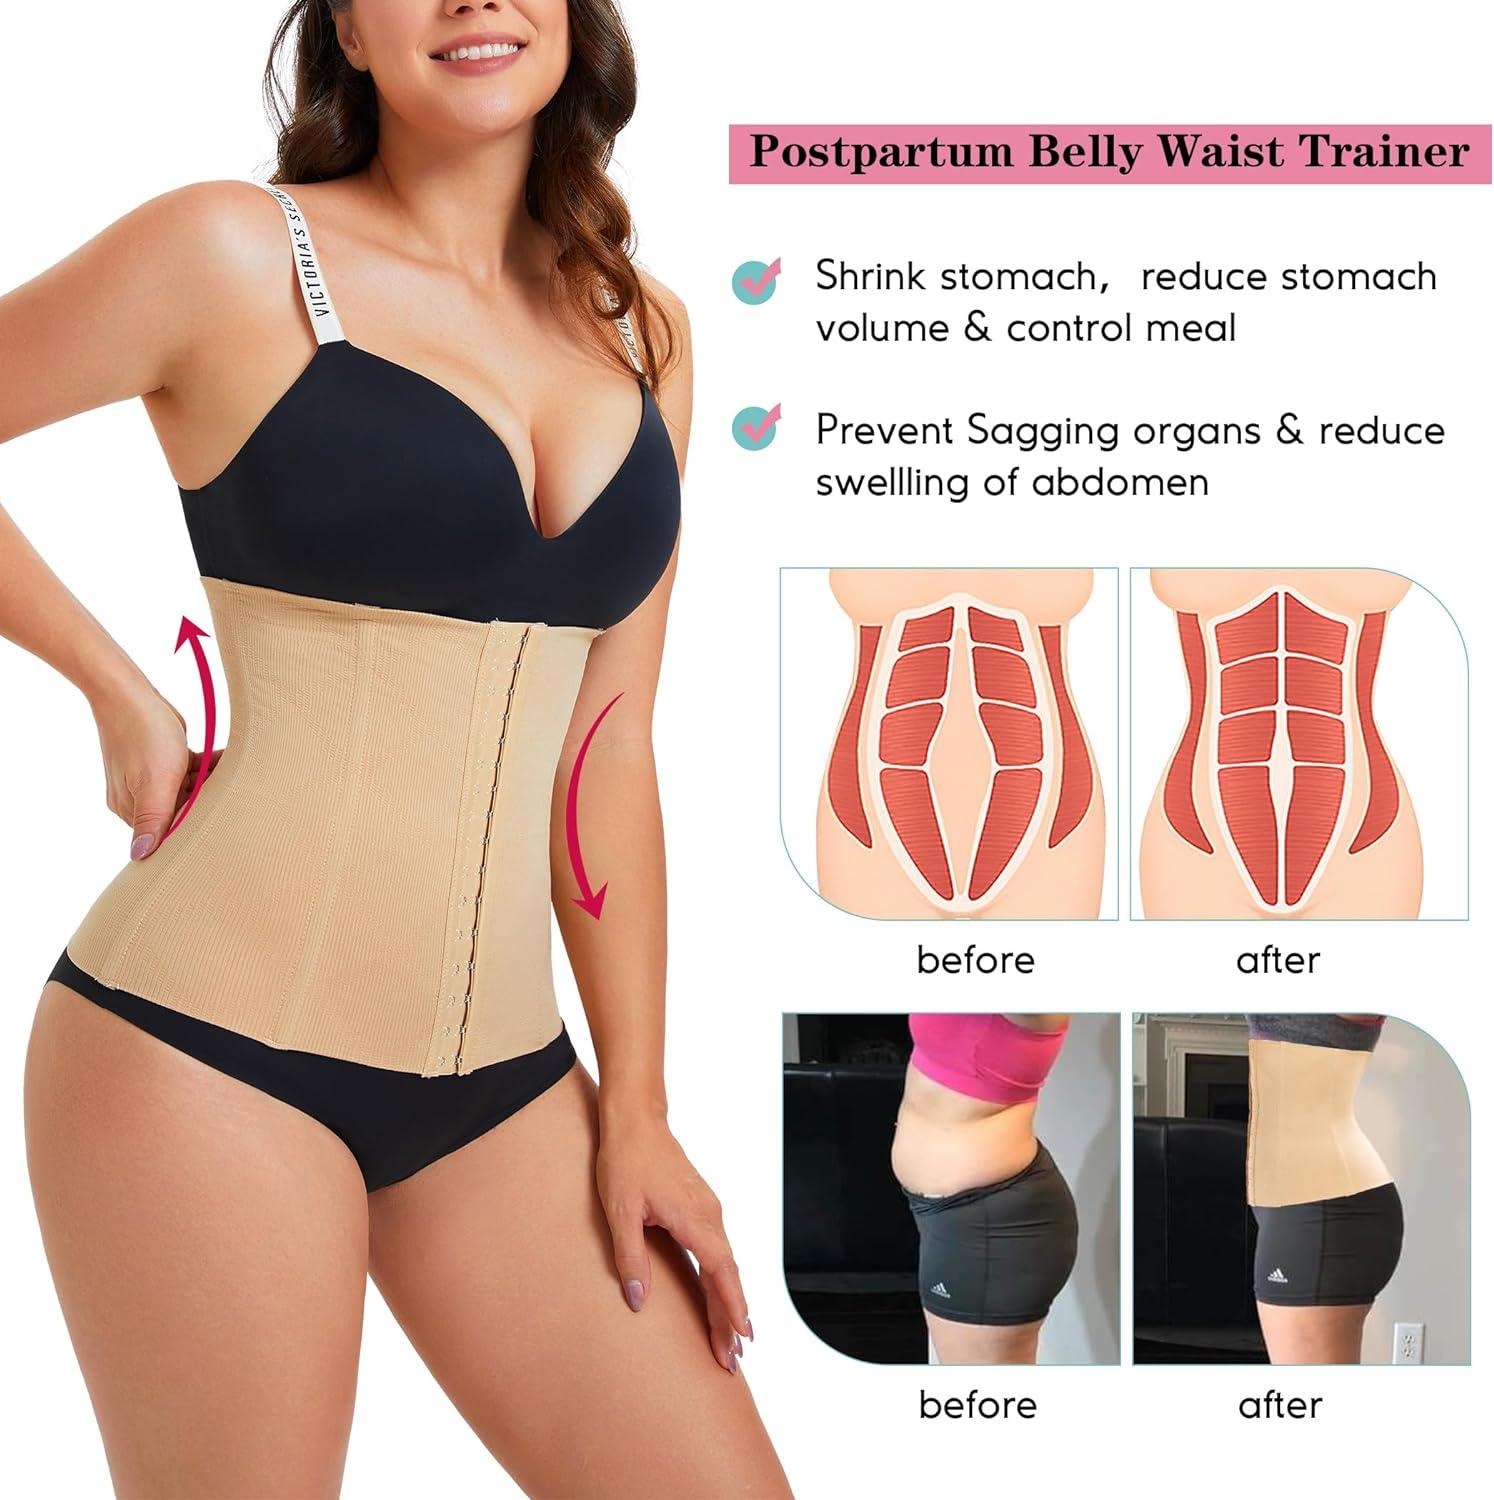 LODAY 2 in 1 Postpartum Recovery Belt Body Wraps Works for Tighten Loose  Skin Beige Hook Small